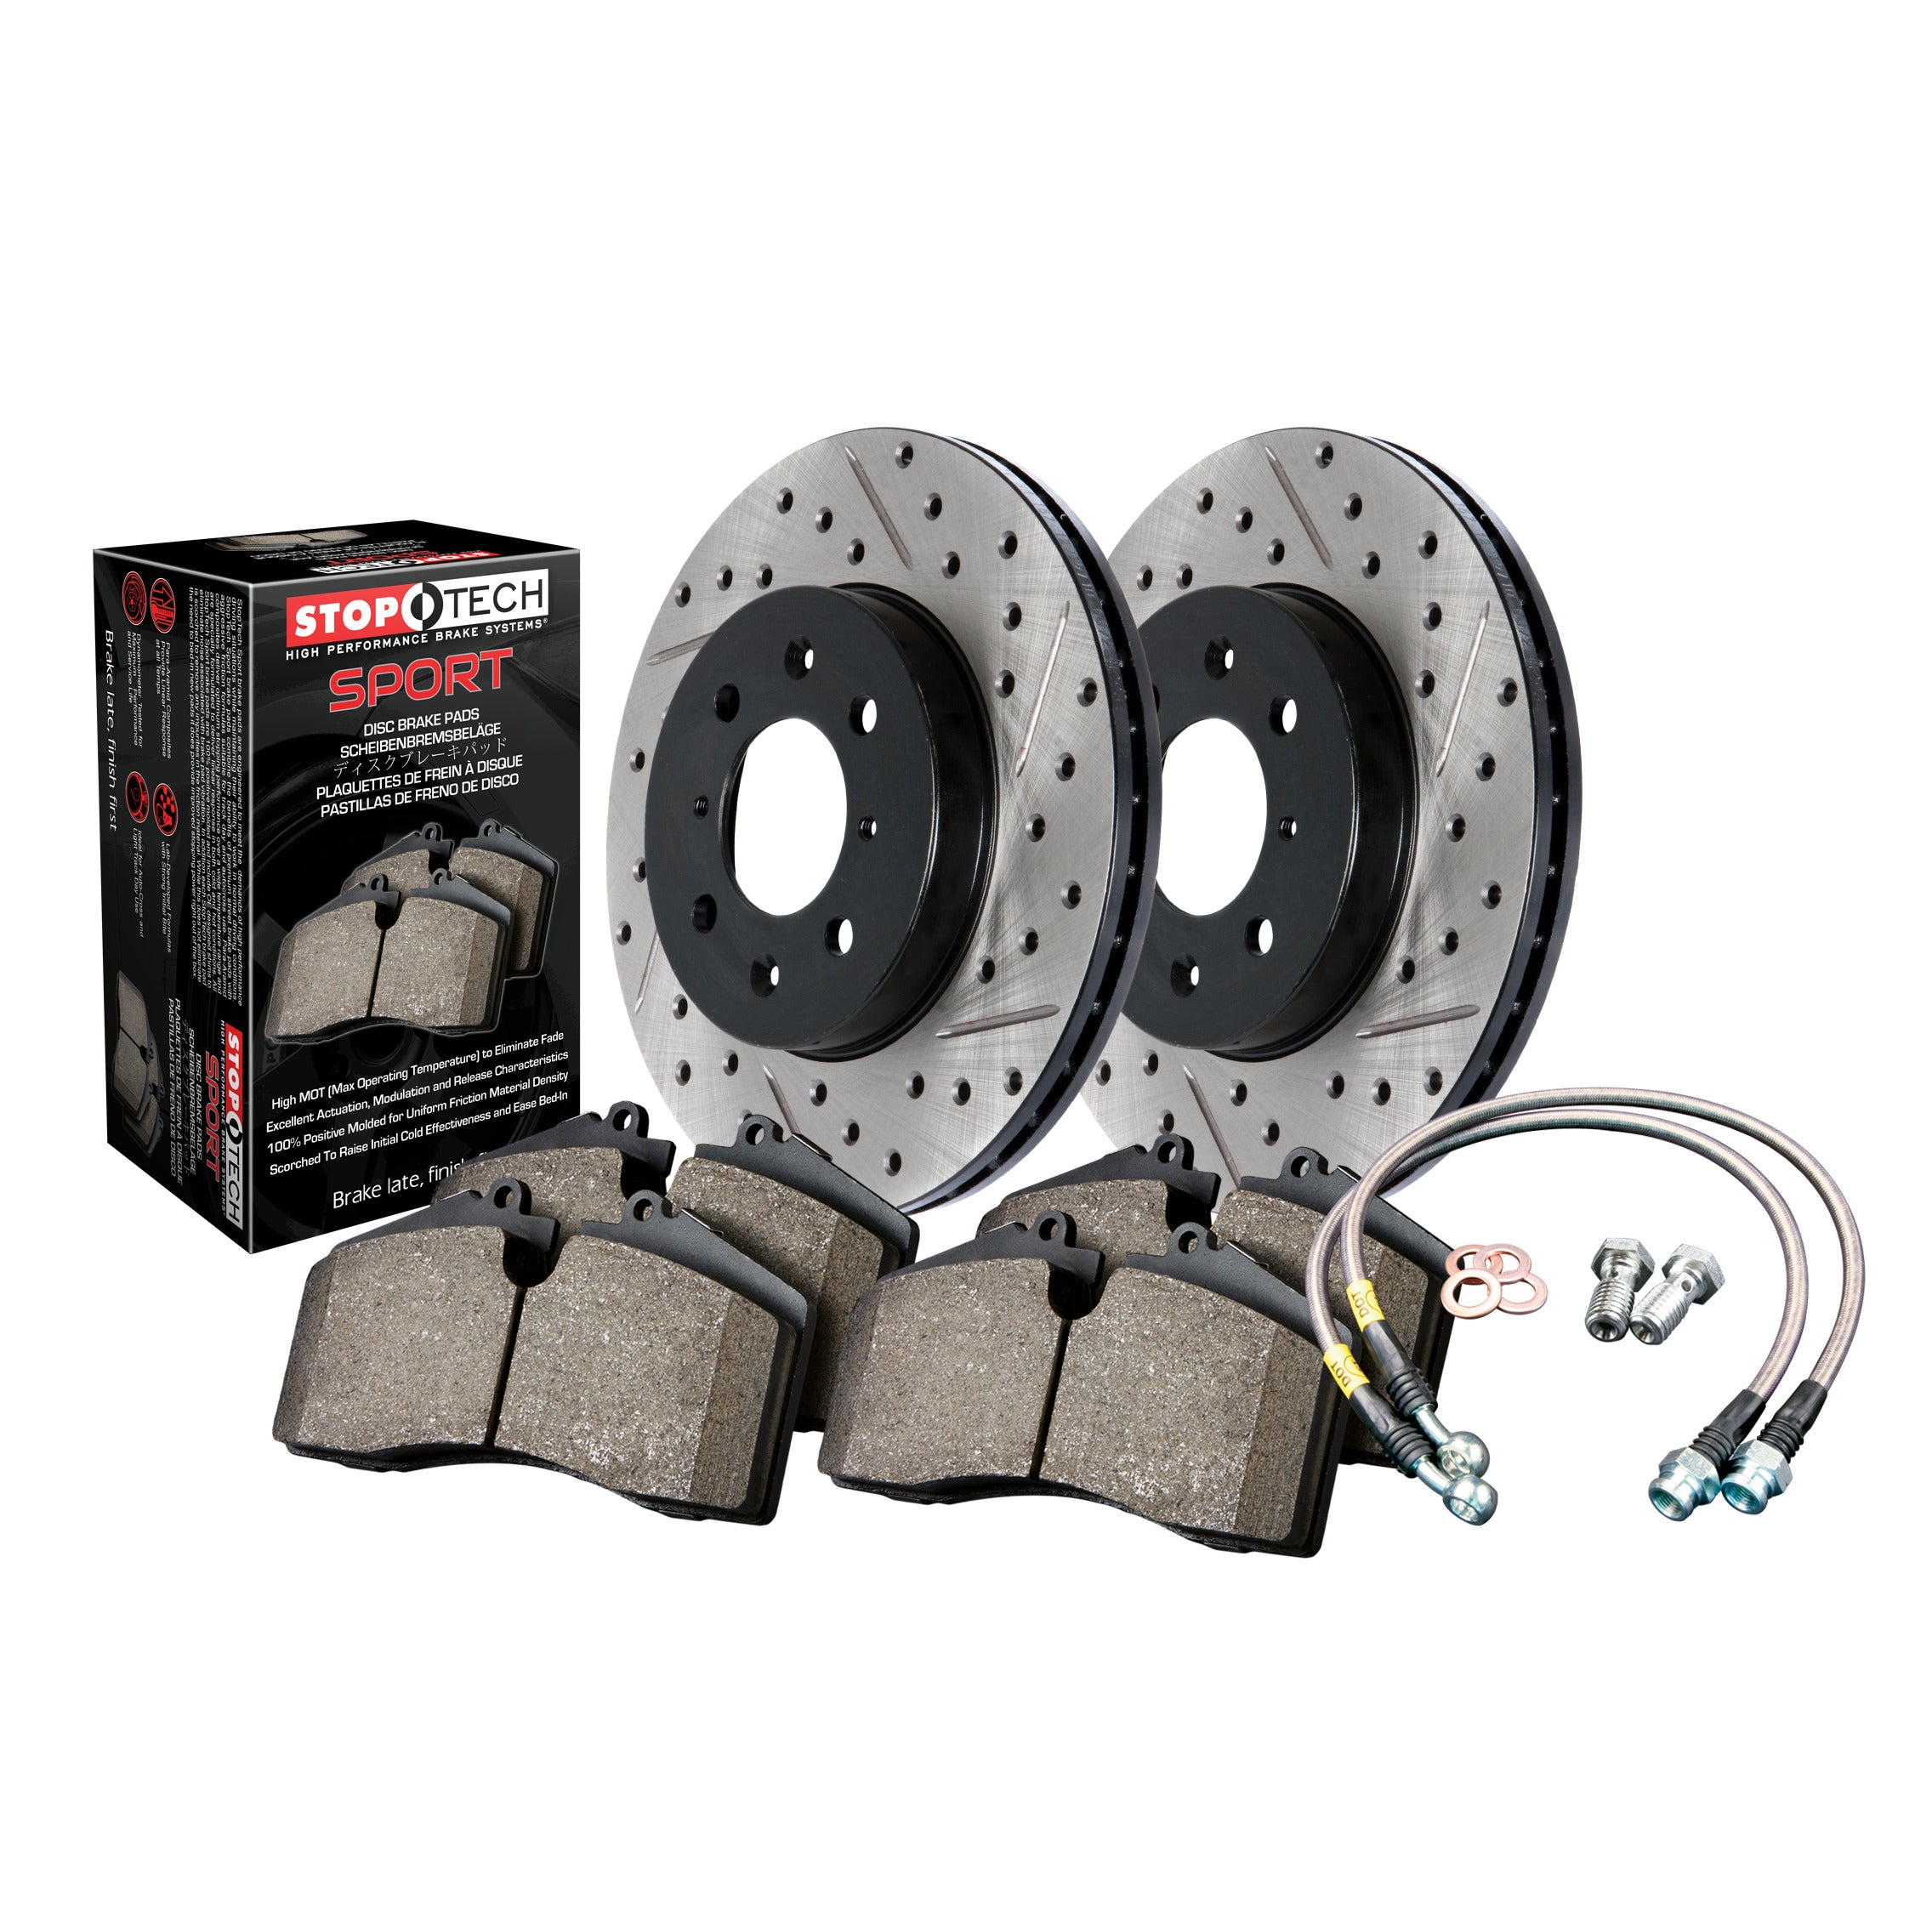 Stoptech 978.47004F Ultra-Premium Sport Kit - Slotted and Drilled - Front - 1998-2001 Subaru Impreza RS on Bleeding Tarmac